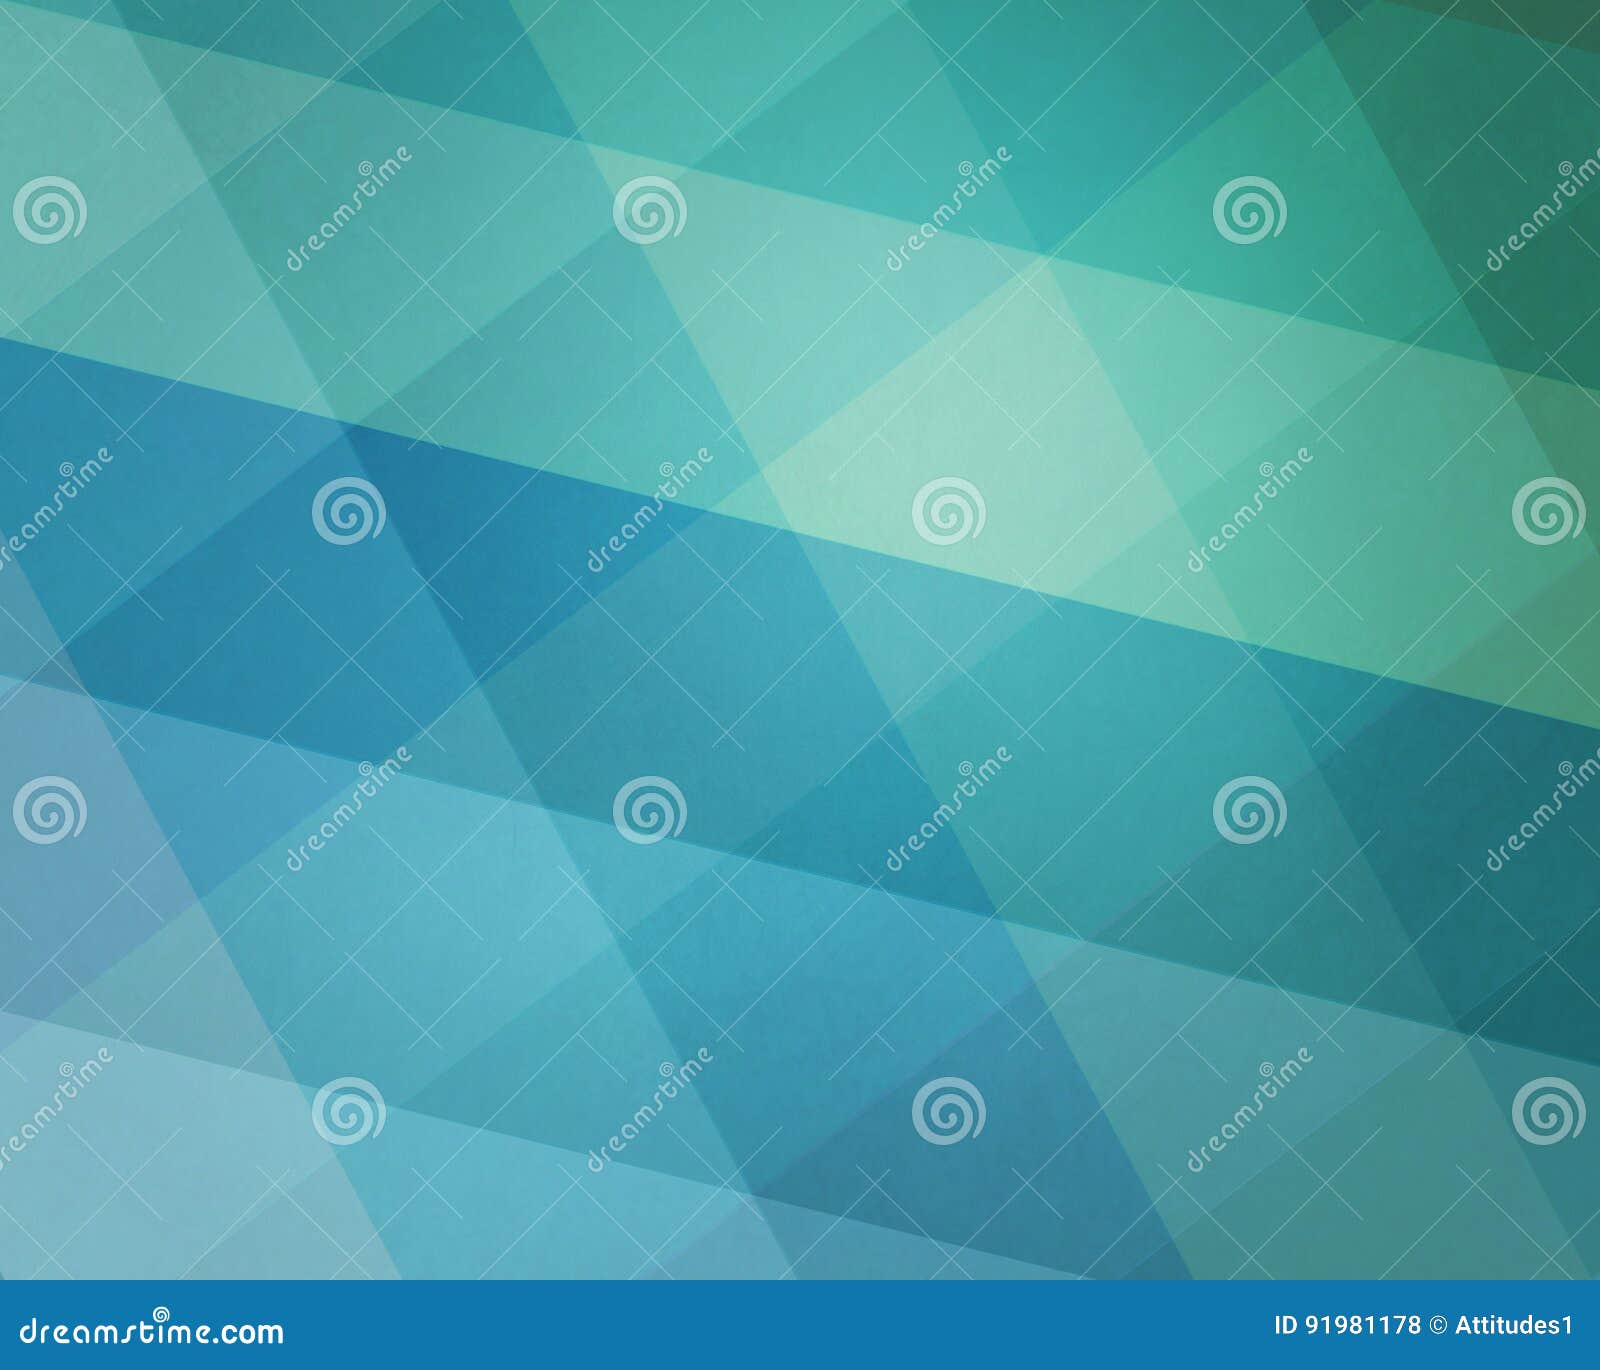 abstract blue green background pattern with diamond blocks of beach theme color hues